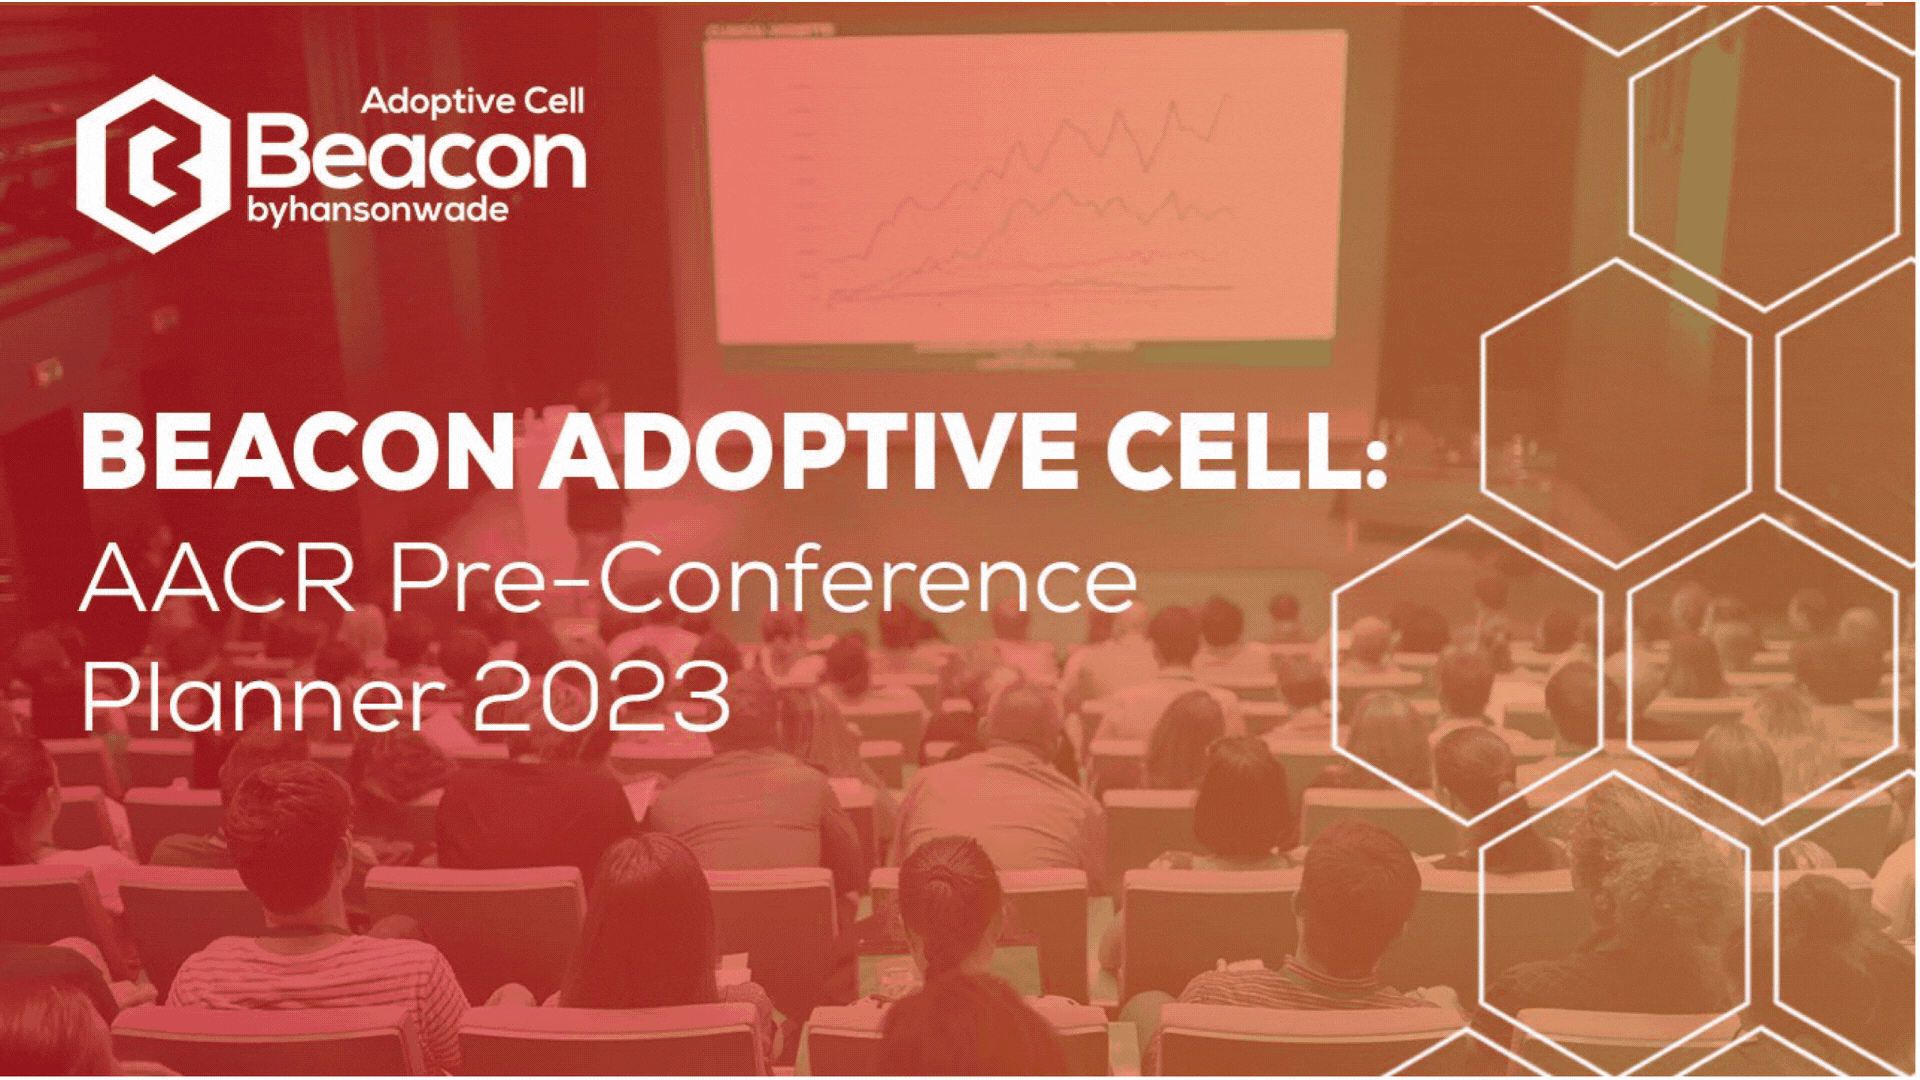 Beacon Adoptive Cell AACR Annual Meeting 2023 Abstracts